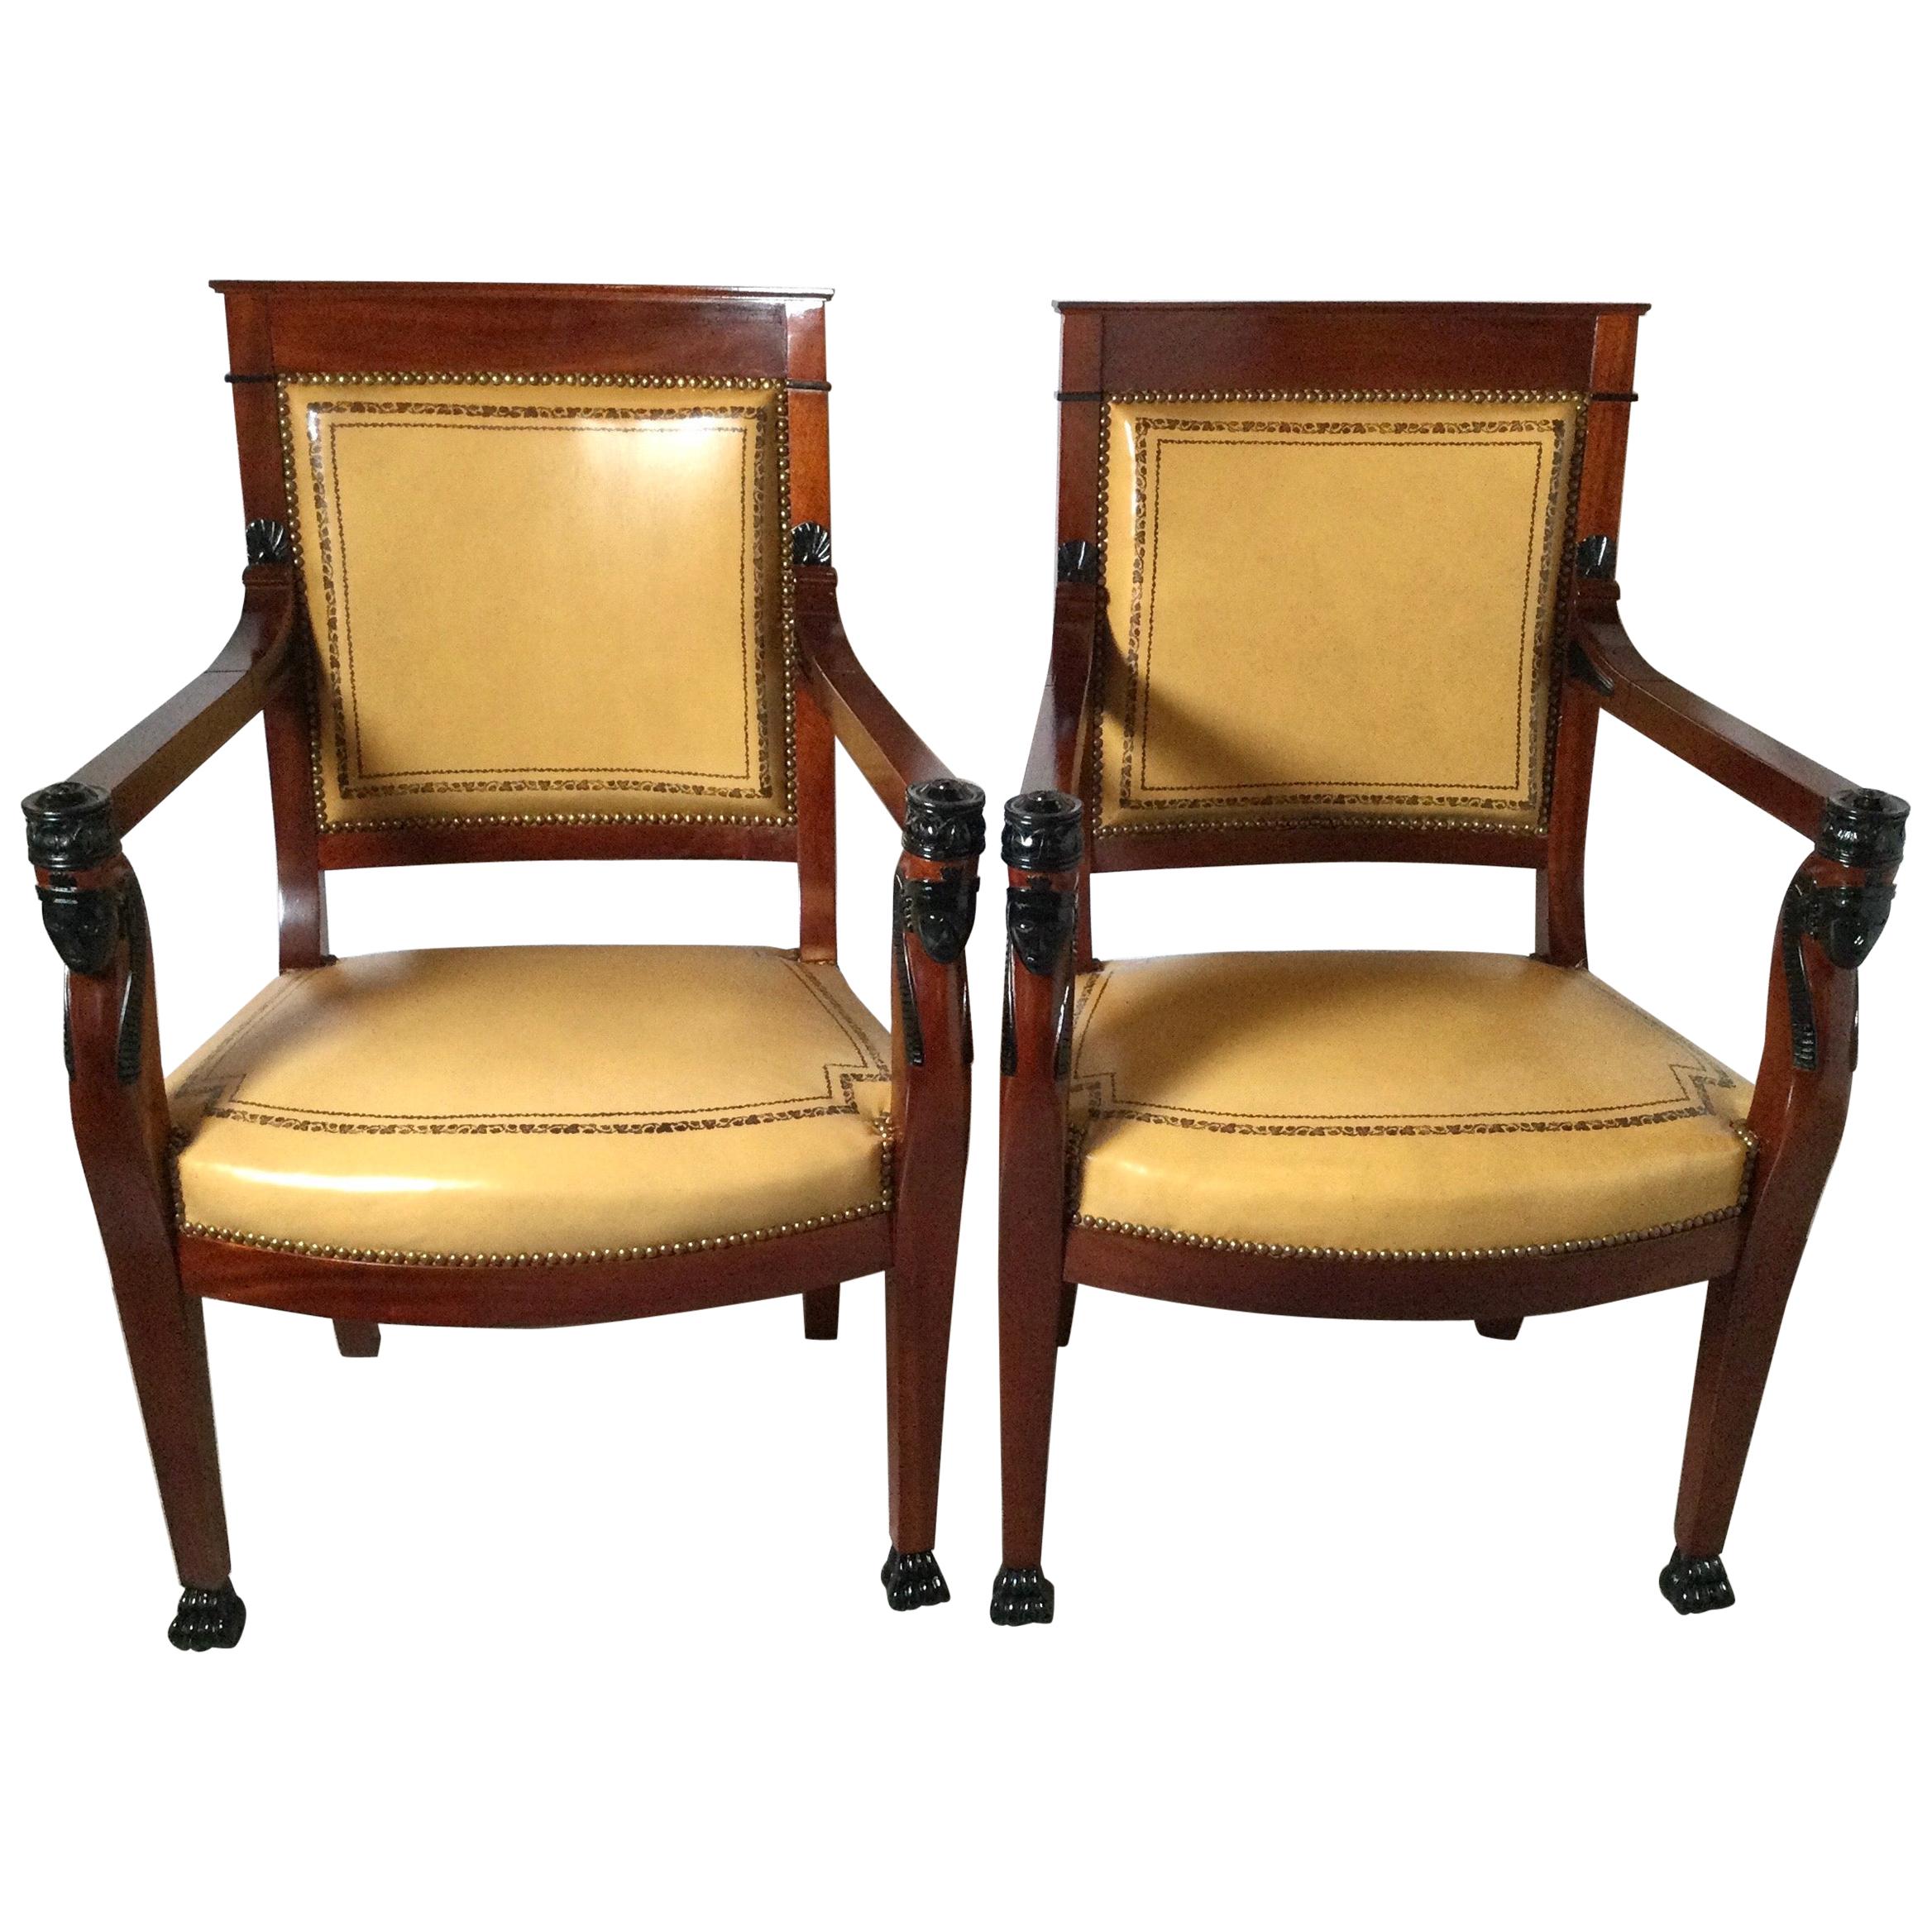 Pair of Egyptian Revival Mahogany and Leather Armchairs